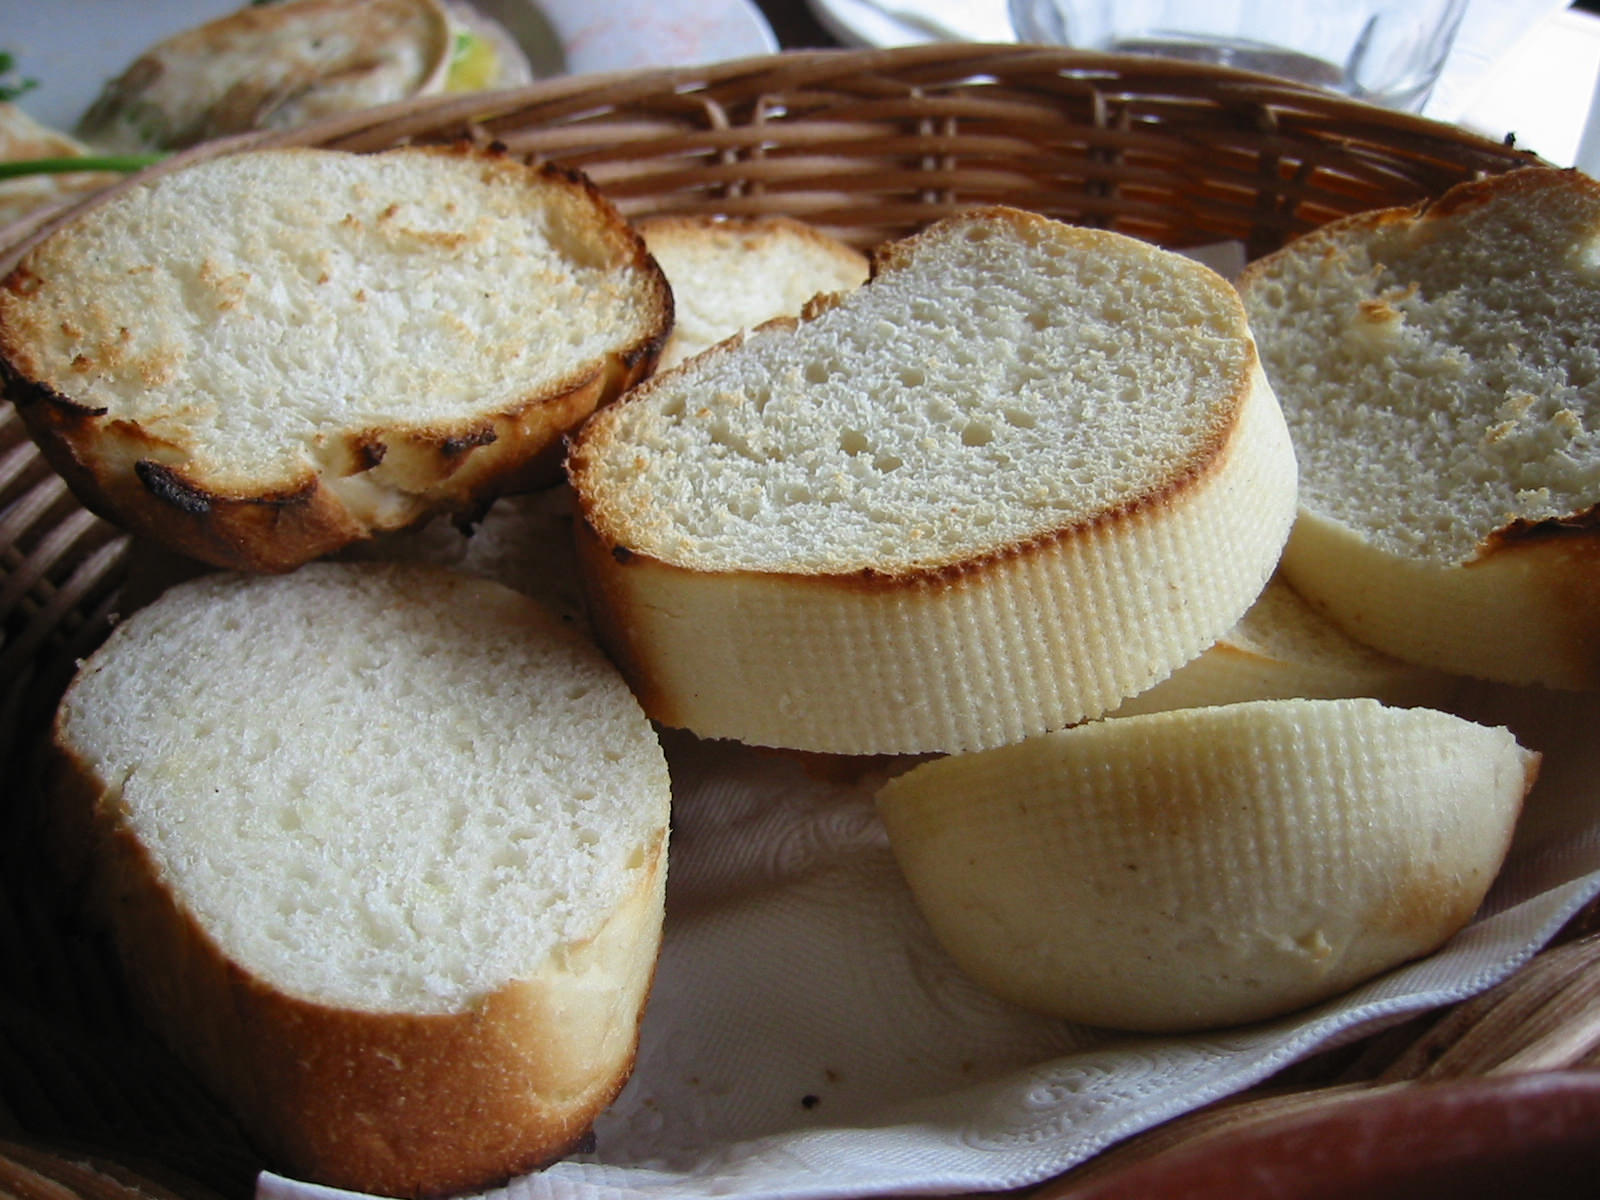 Warm toasted chewy bread